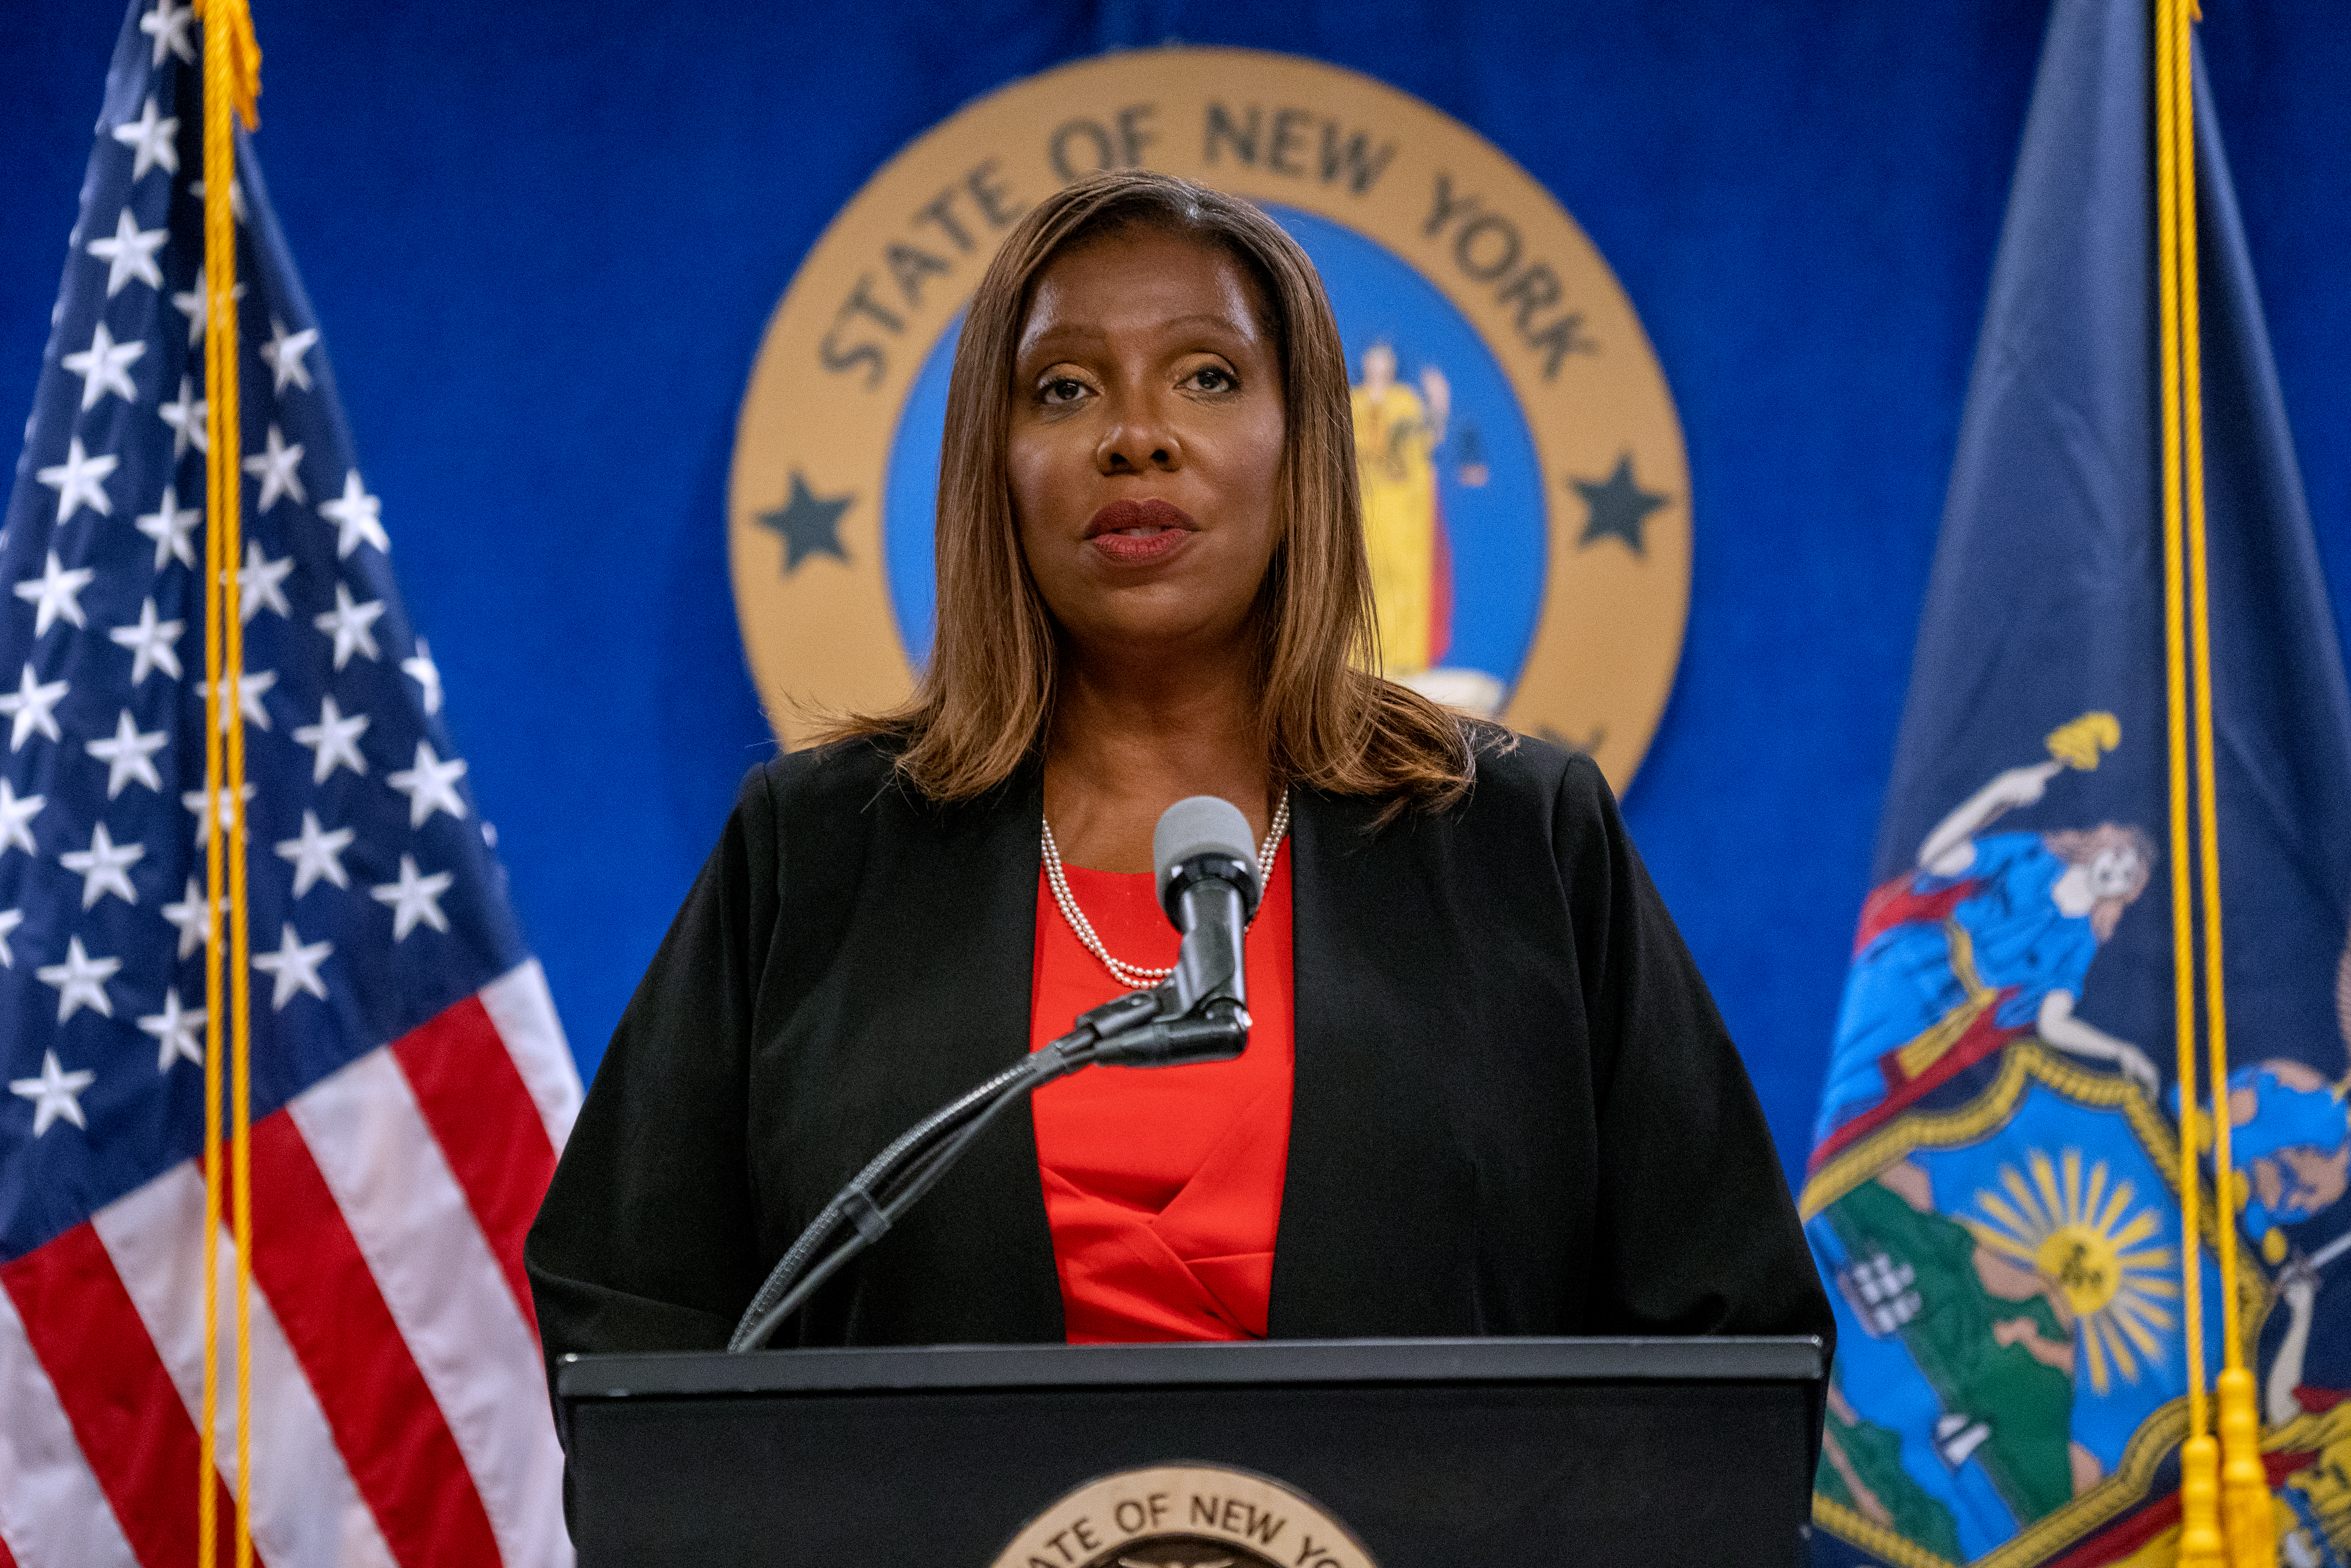 New York Attorney General Letitia James standing at a lectern and speaking into a microphone, with the seal of the state of New York behind her and flags on either side.